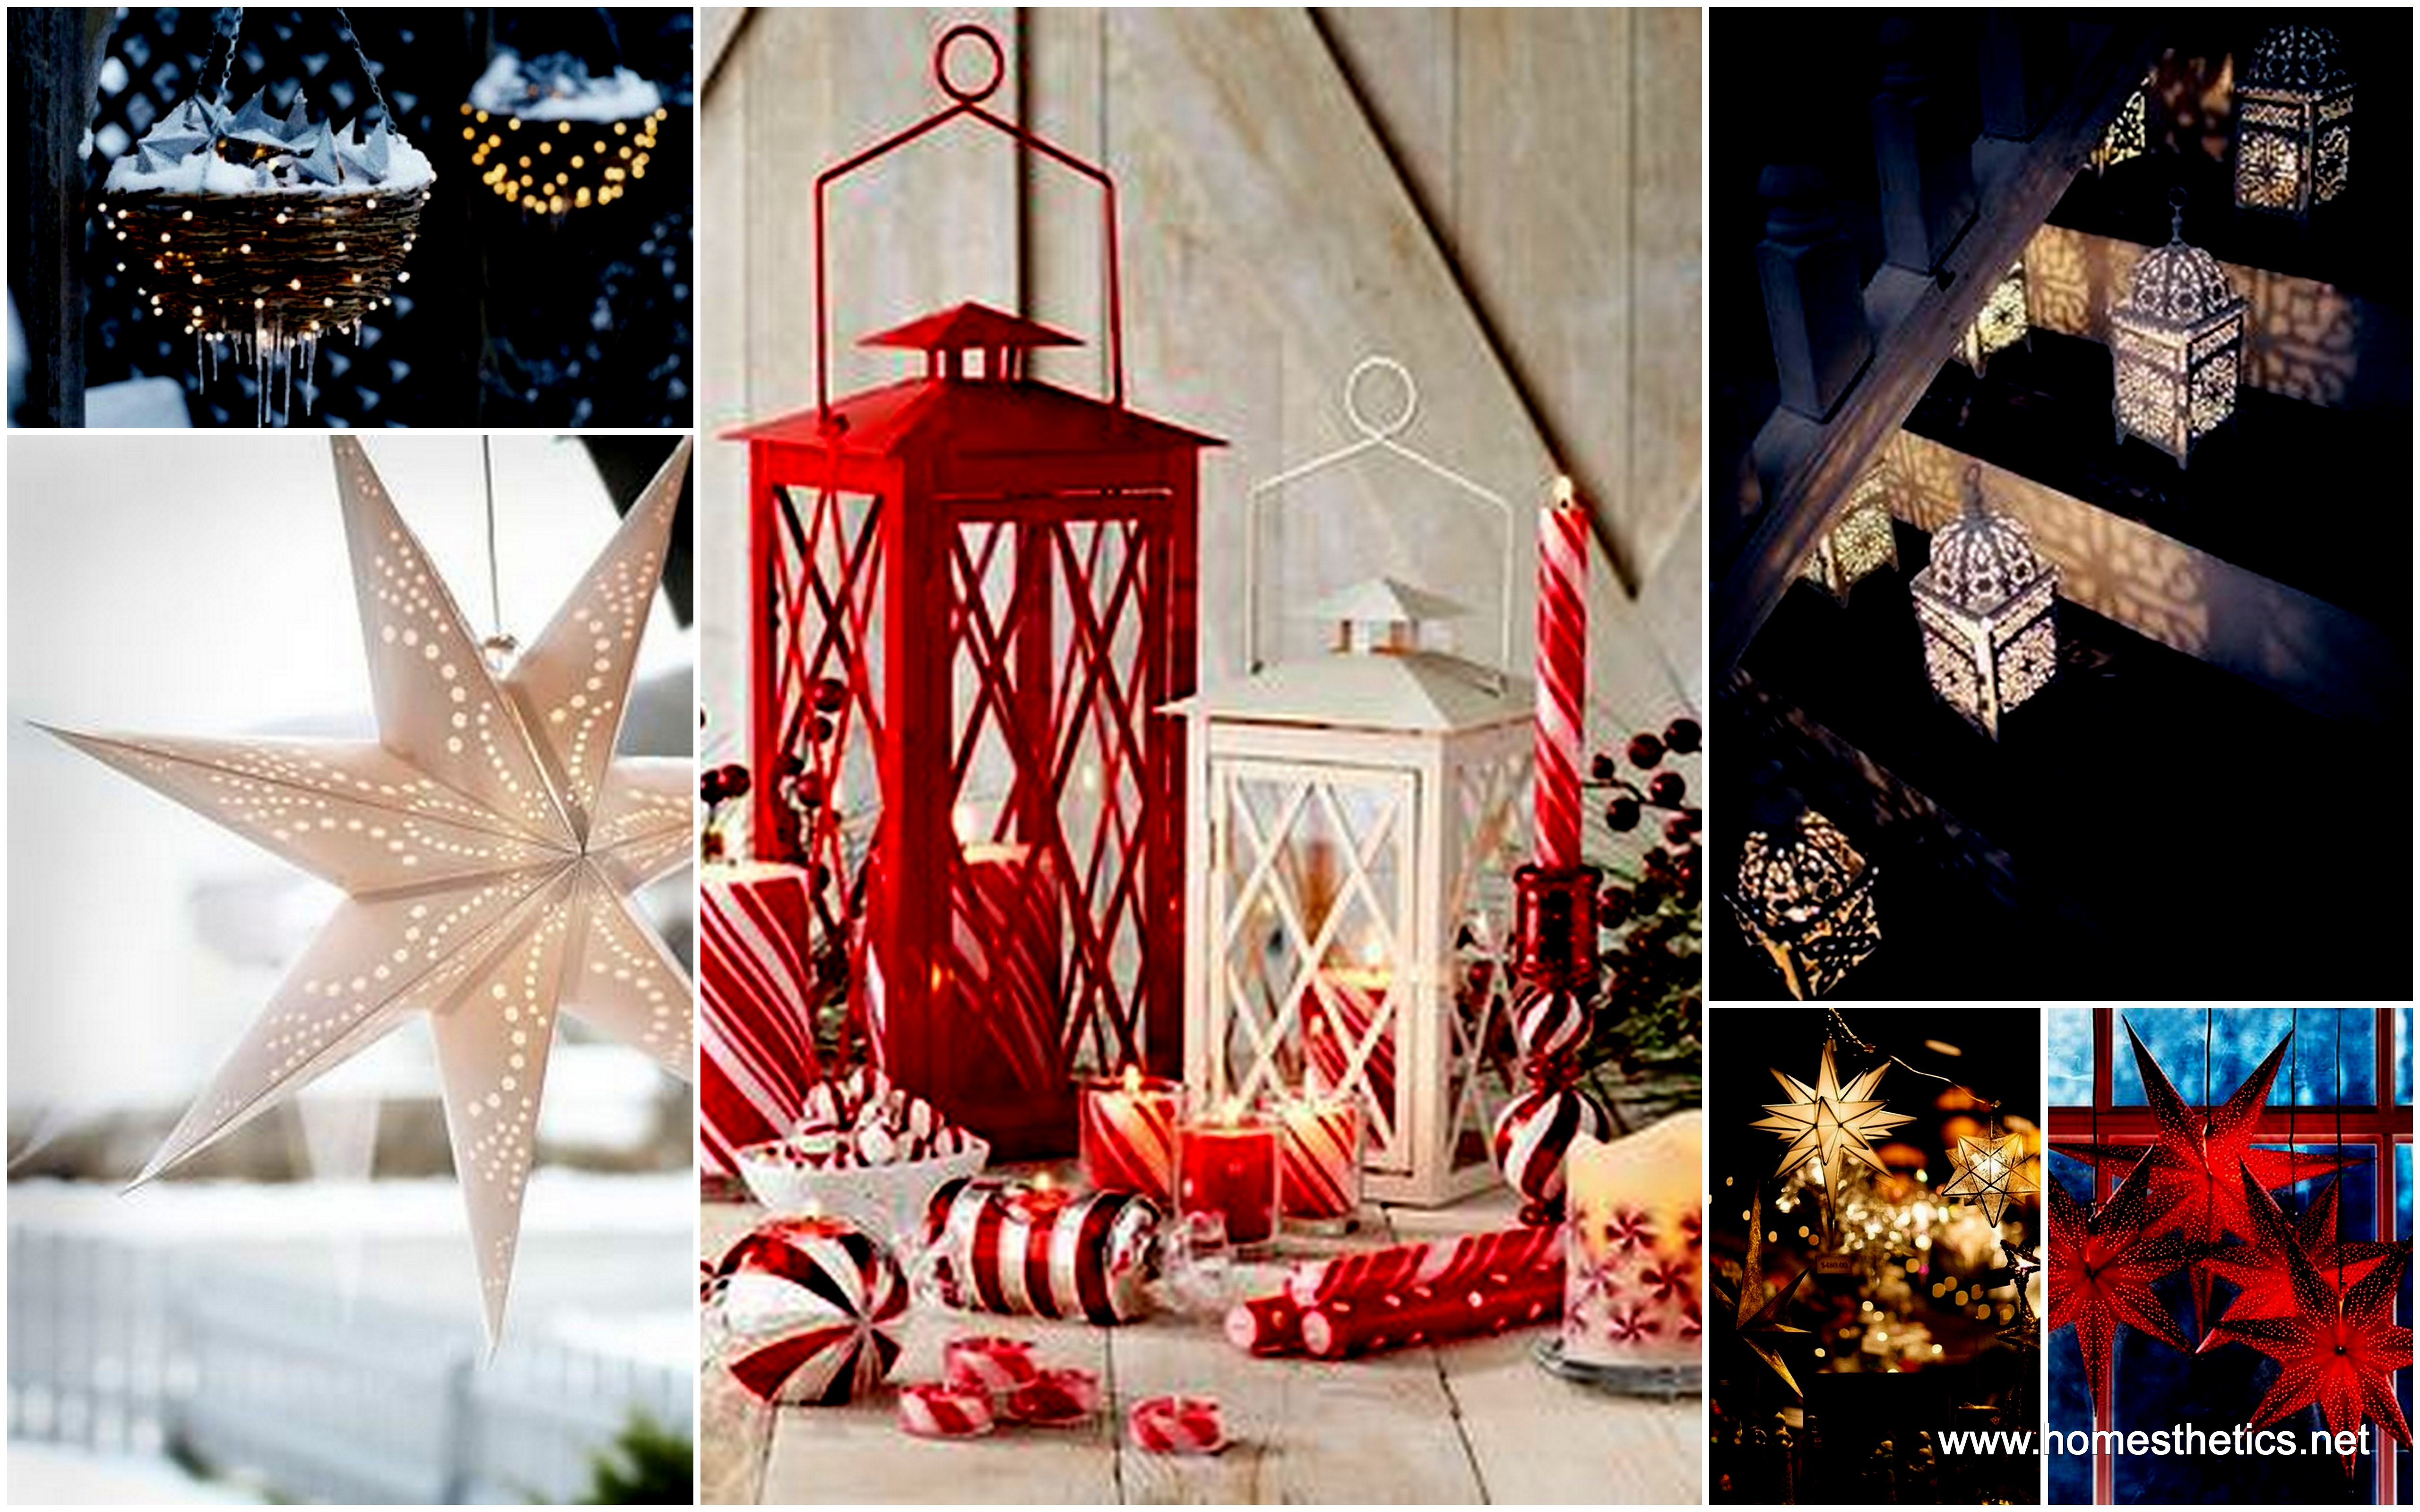 45 Simply Incredible Holiday Lanterns That Will Light Up Your Christmas